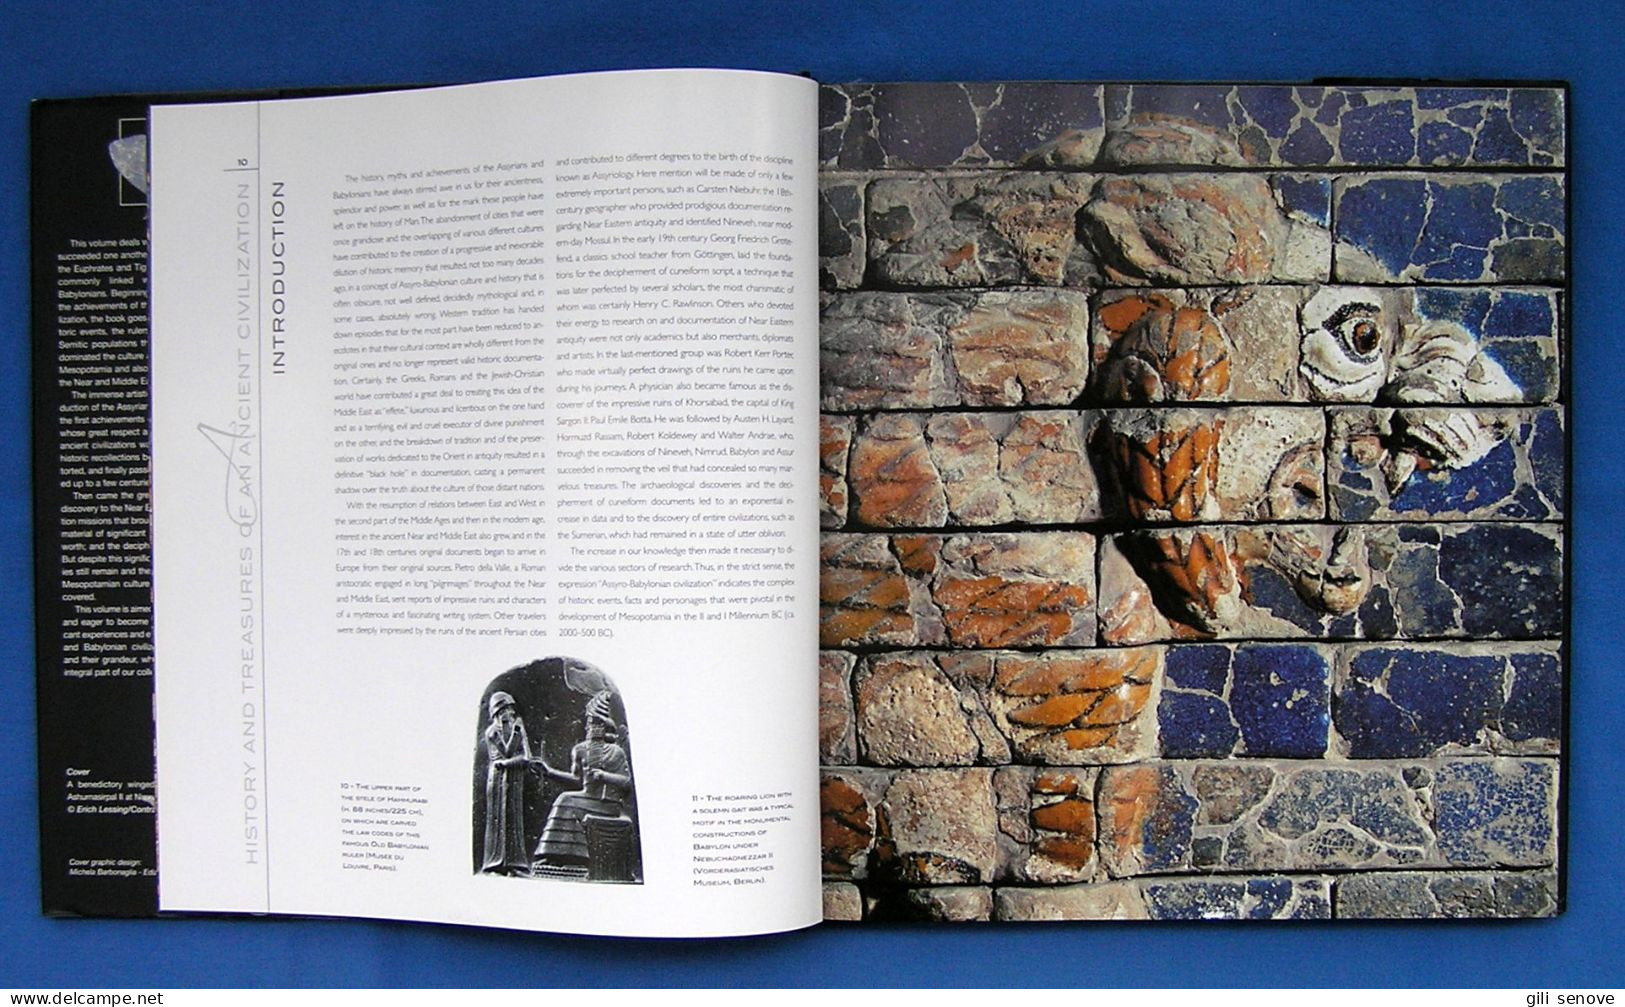 The Assyrians And The Babylonians: History And Treasures Of An Ancient Civilization 2007 - Fine Arts